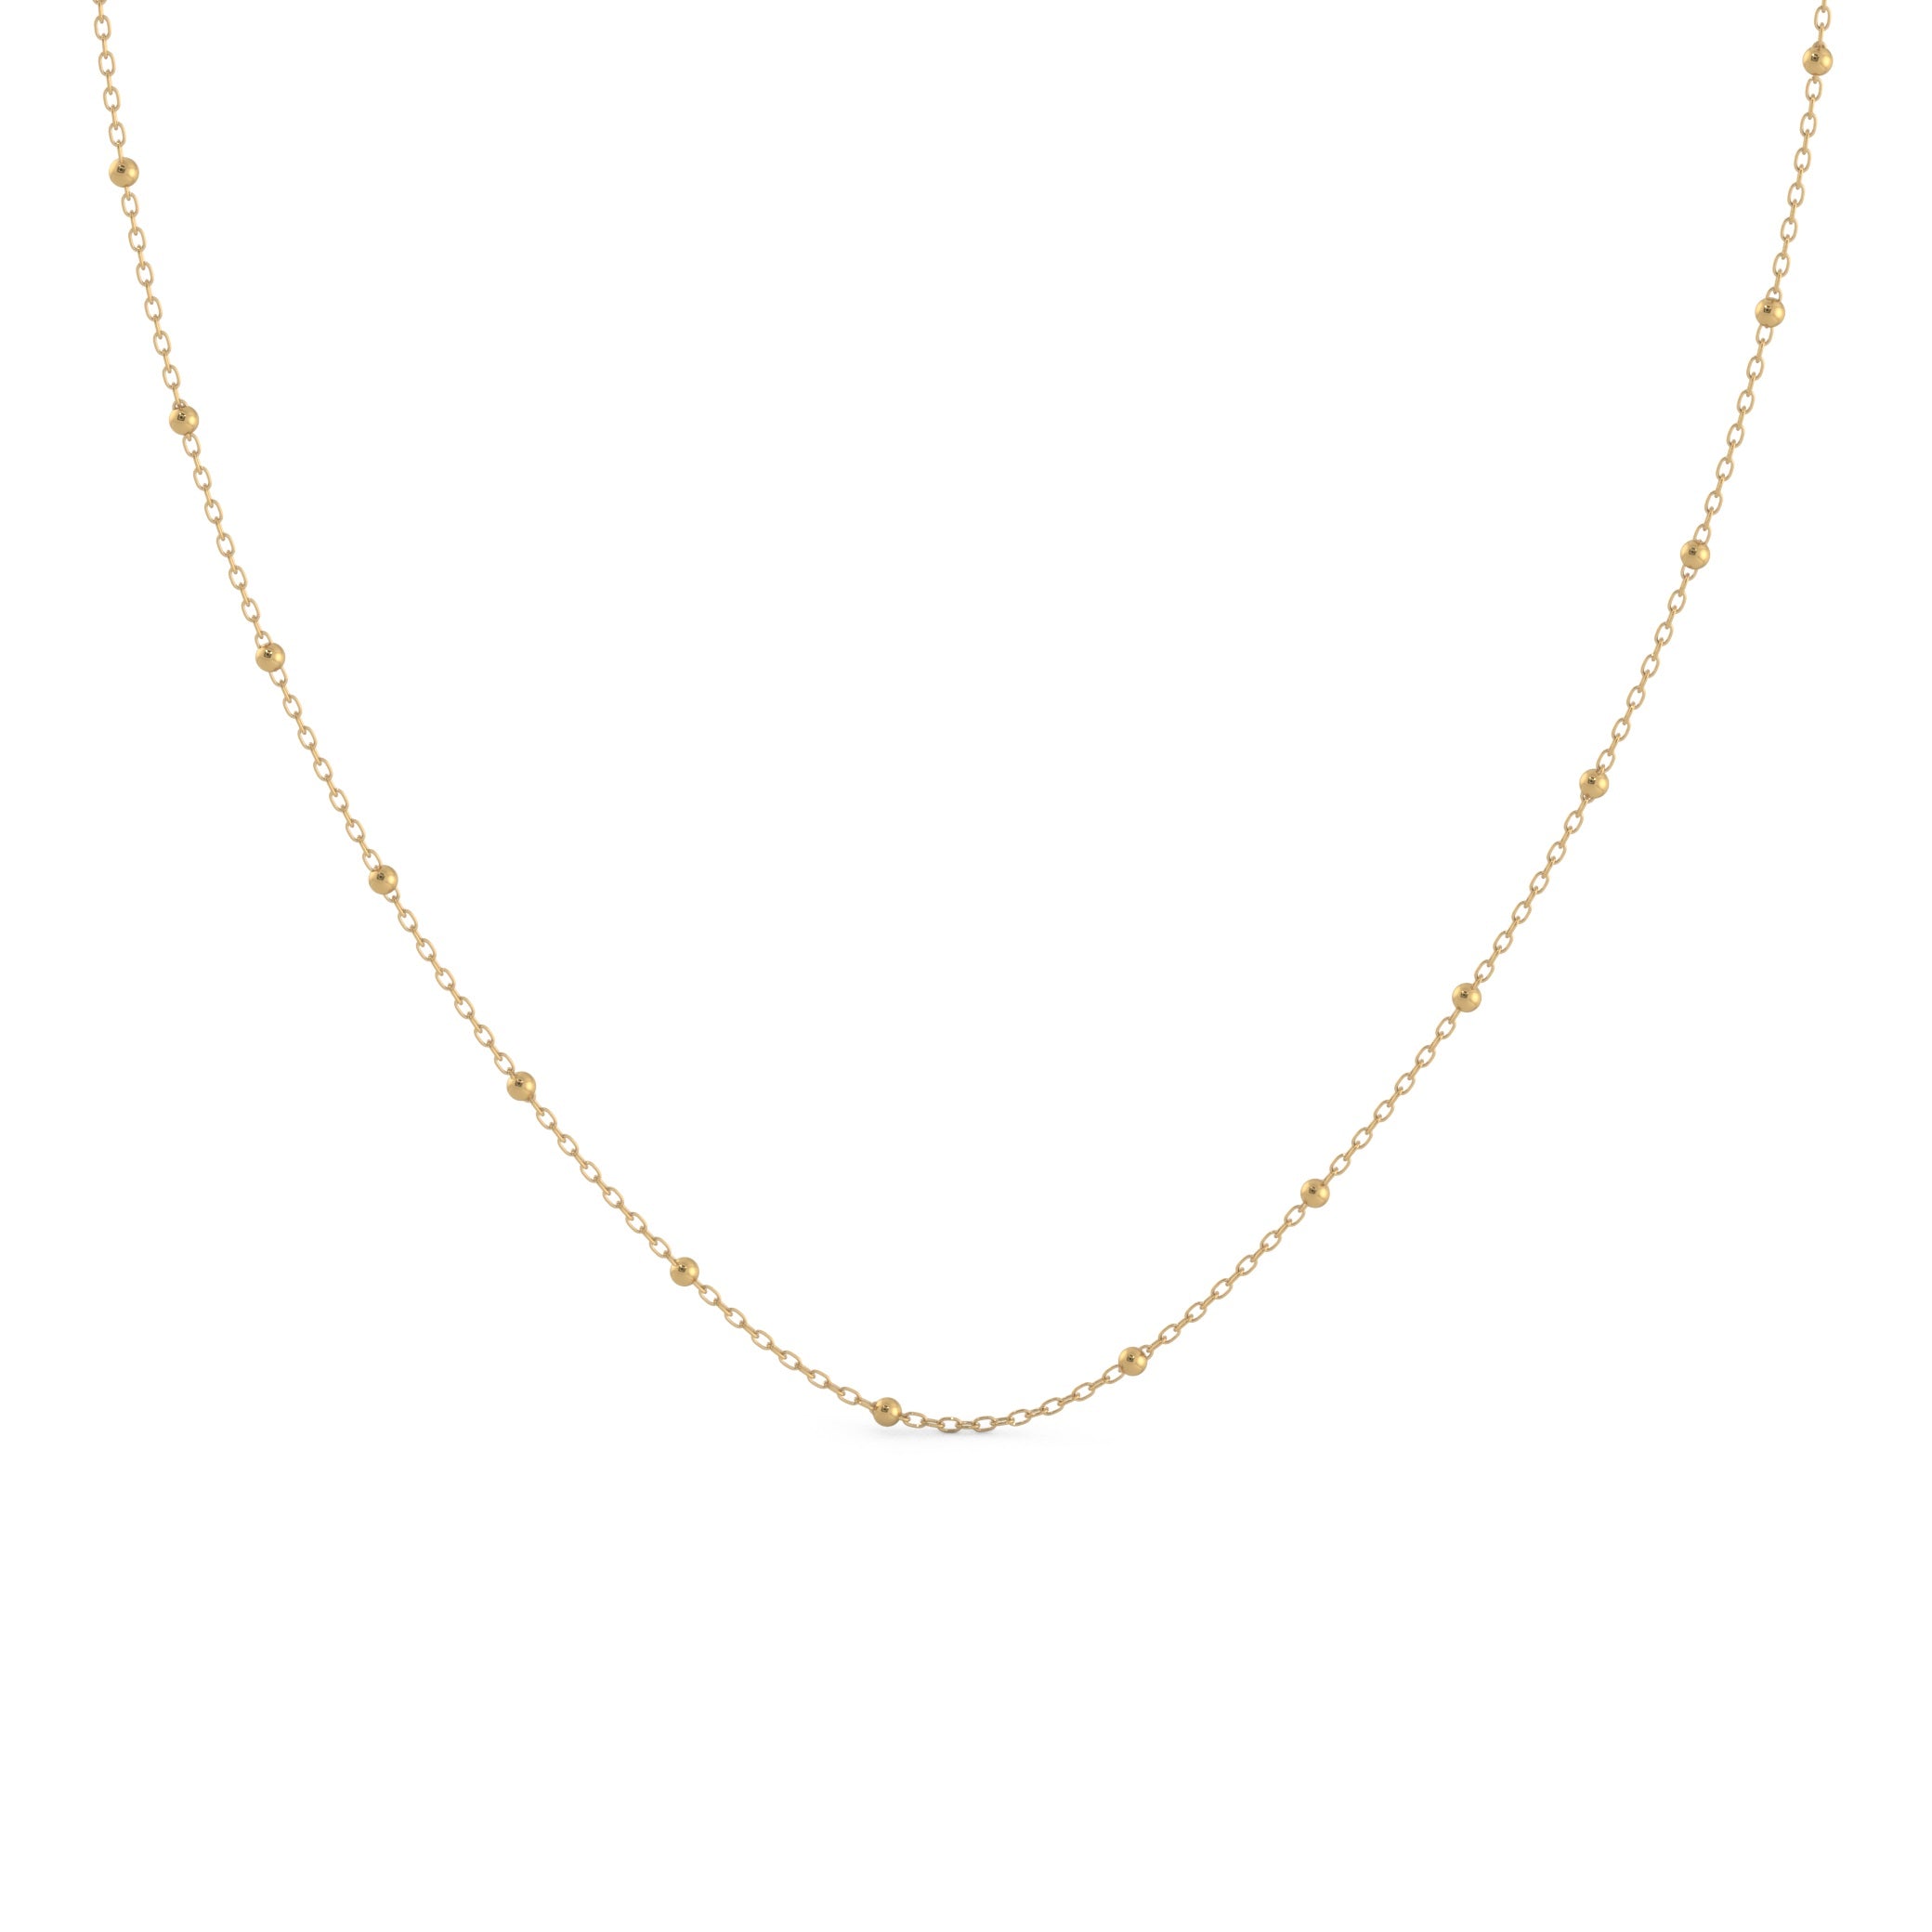 Gold Beaded Necklace Chain